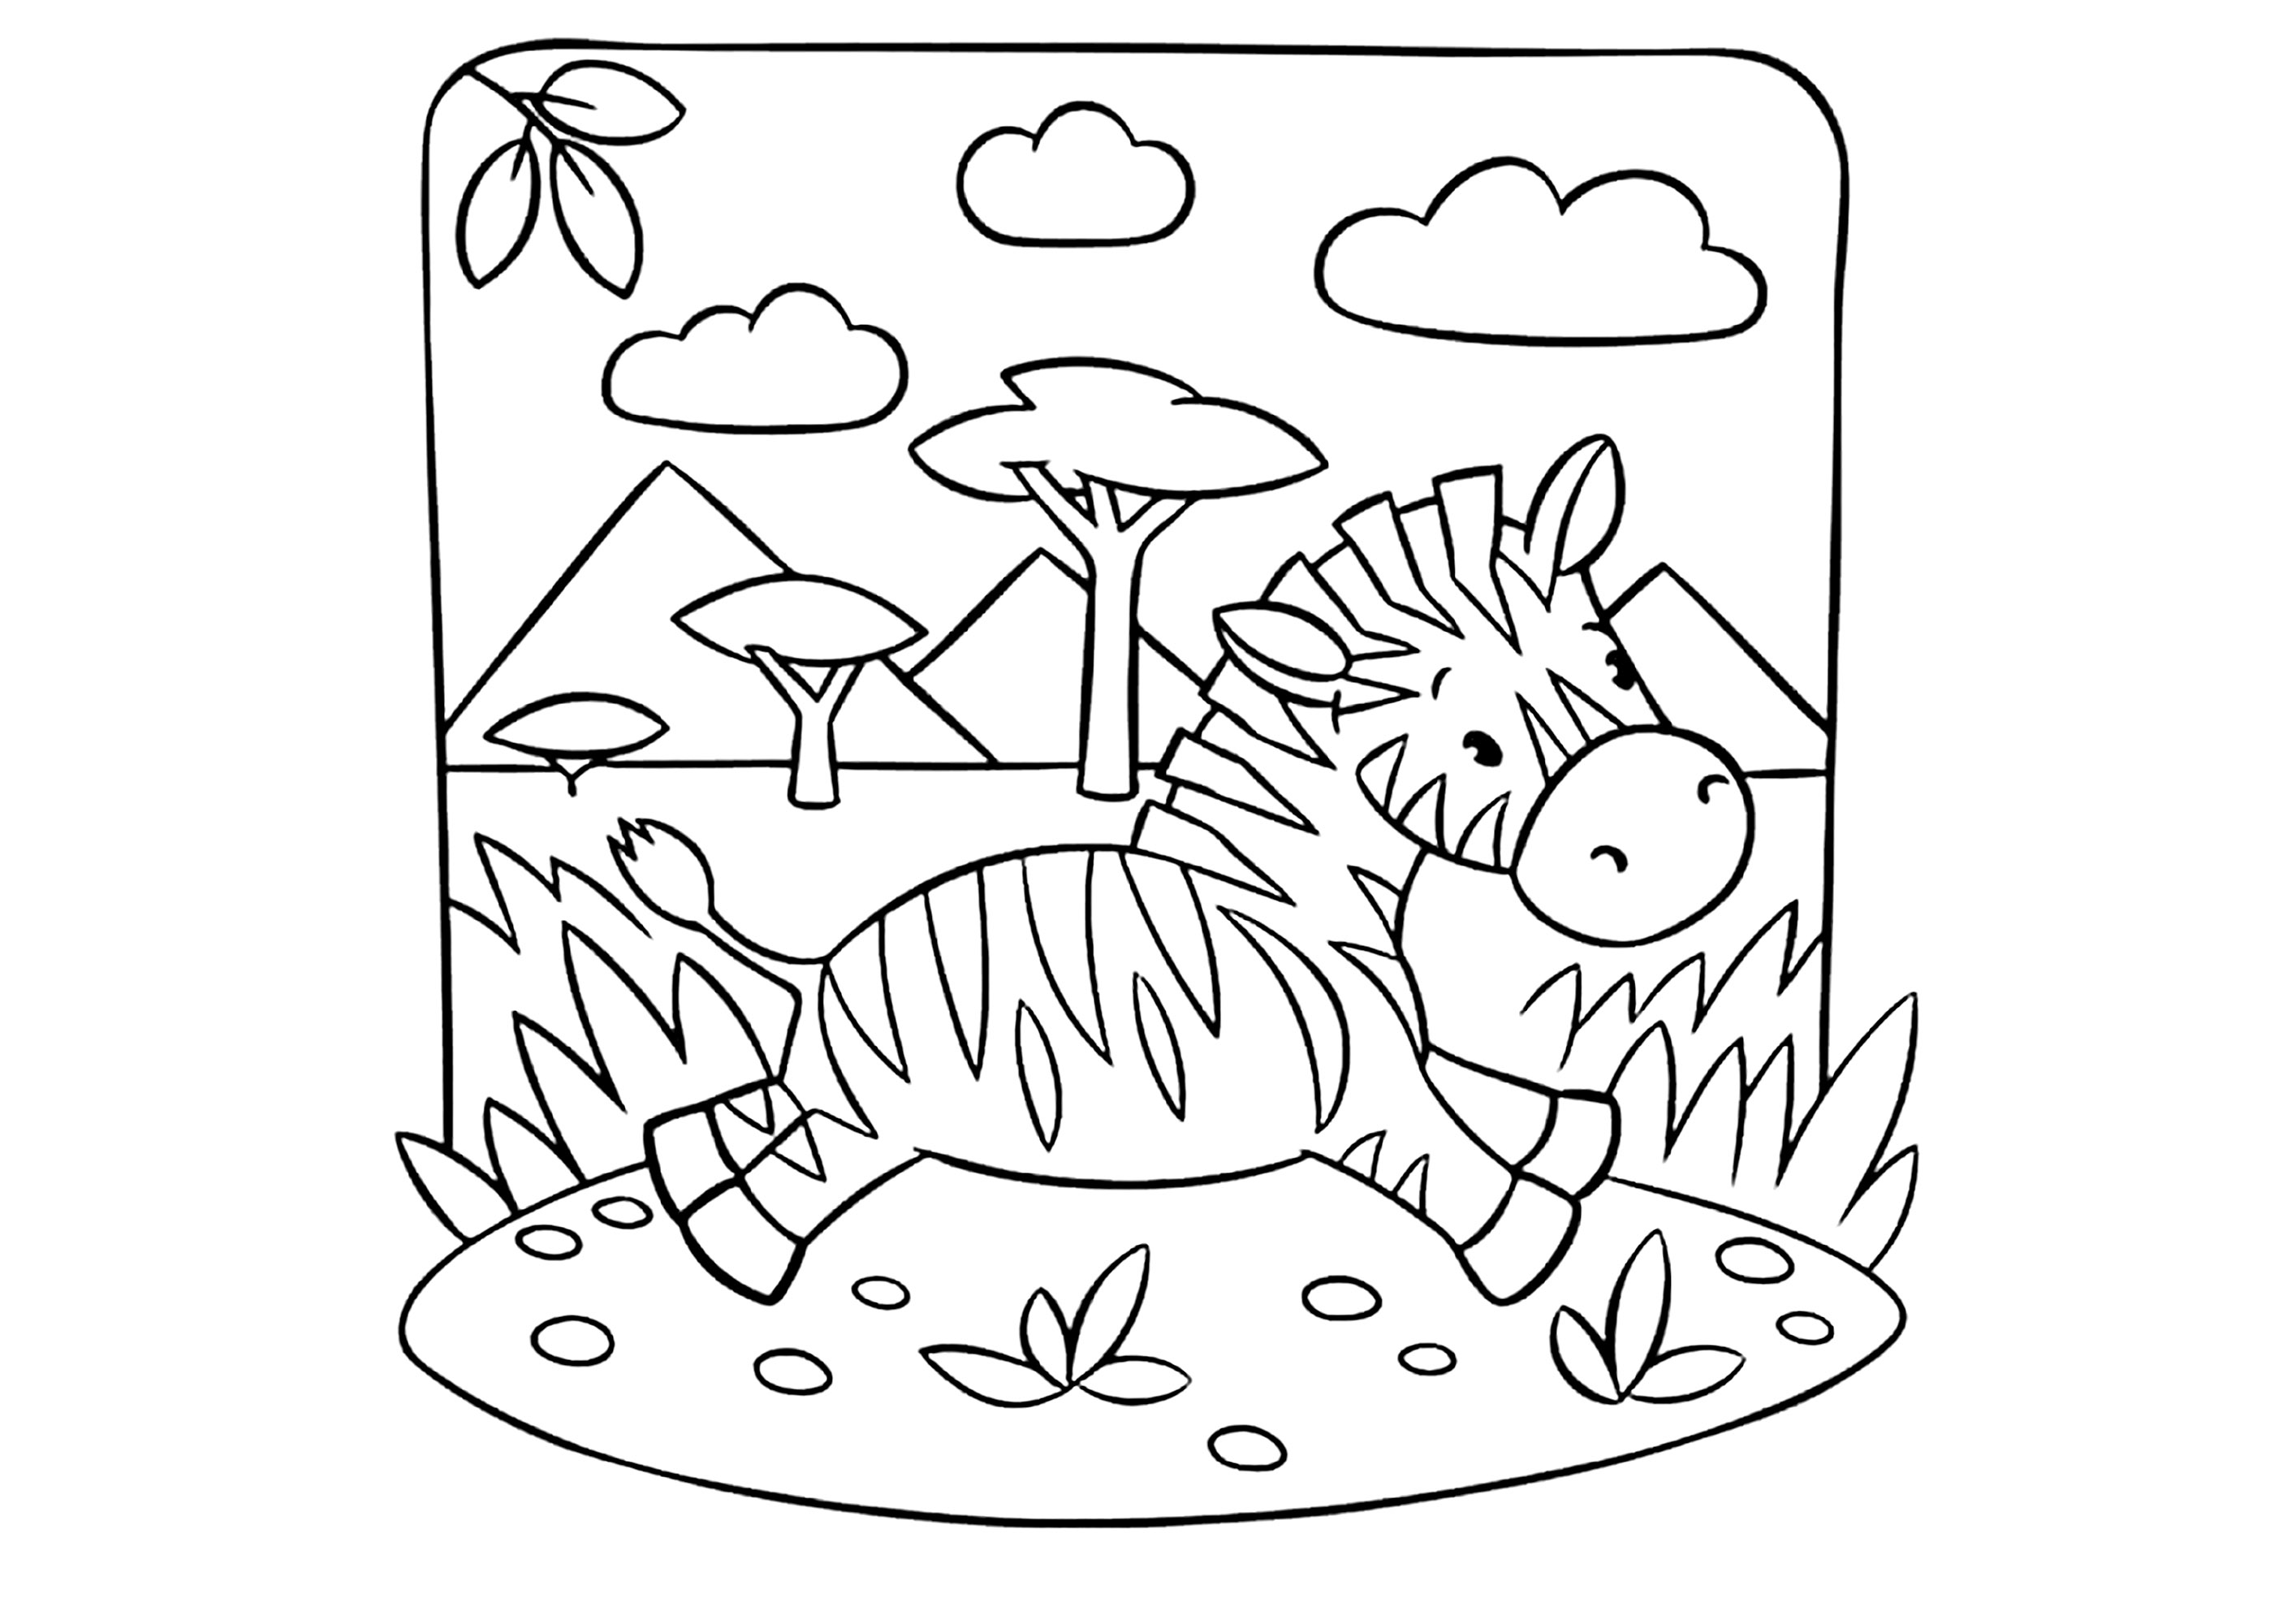 Cute free Zebras coloring page to download